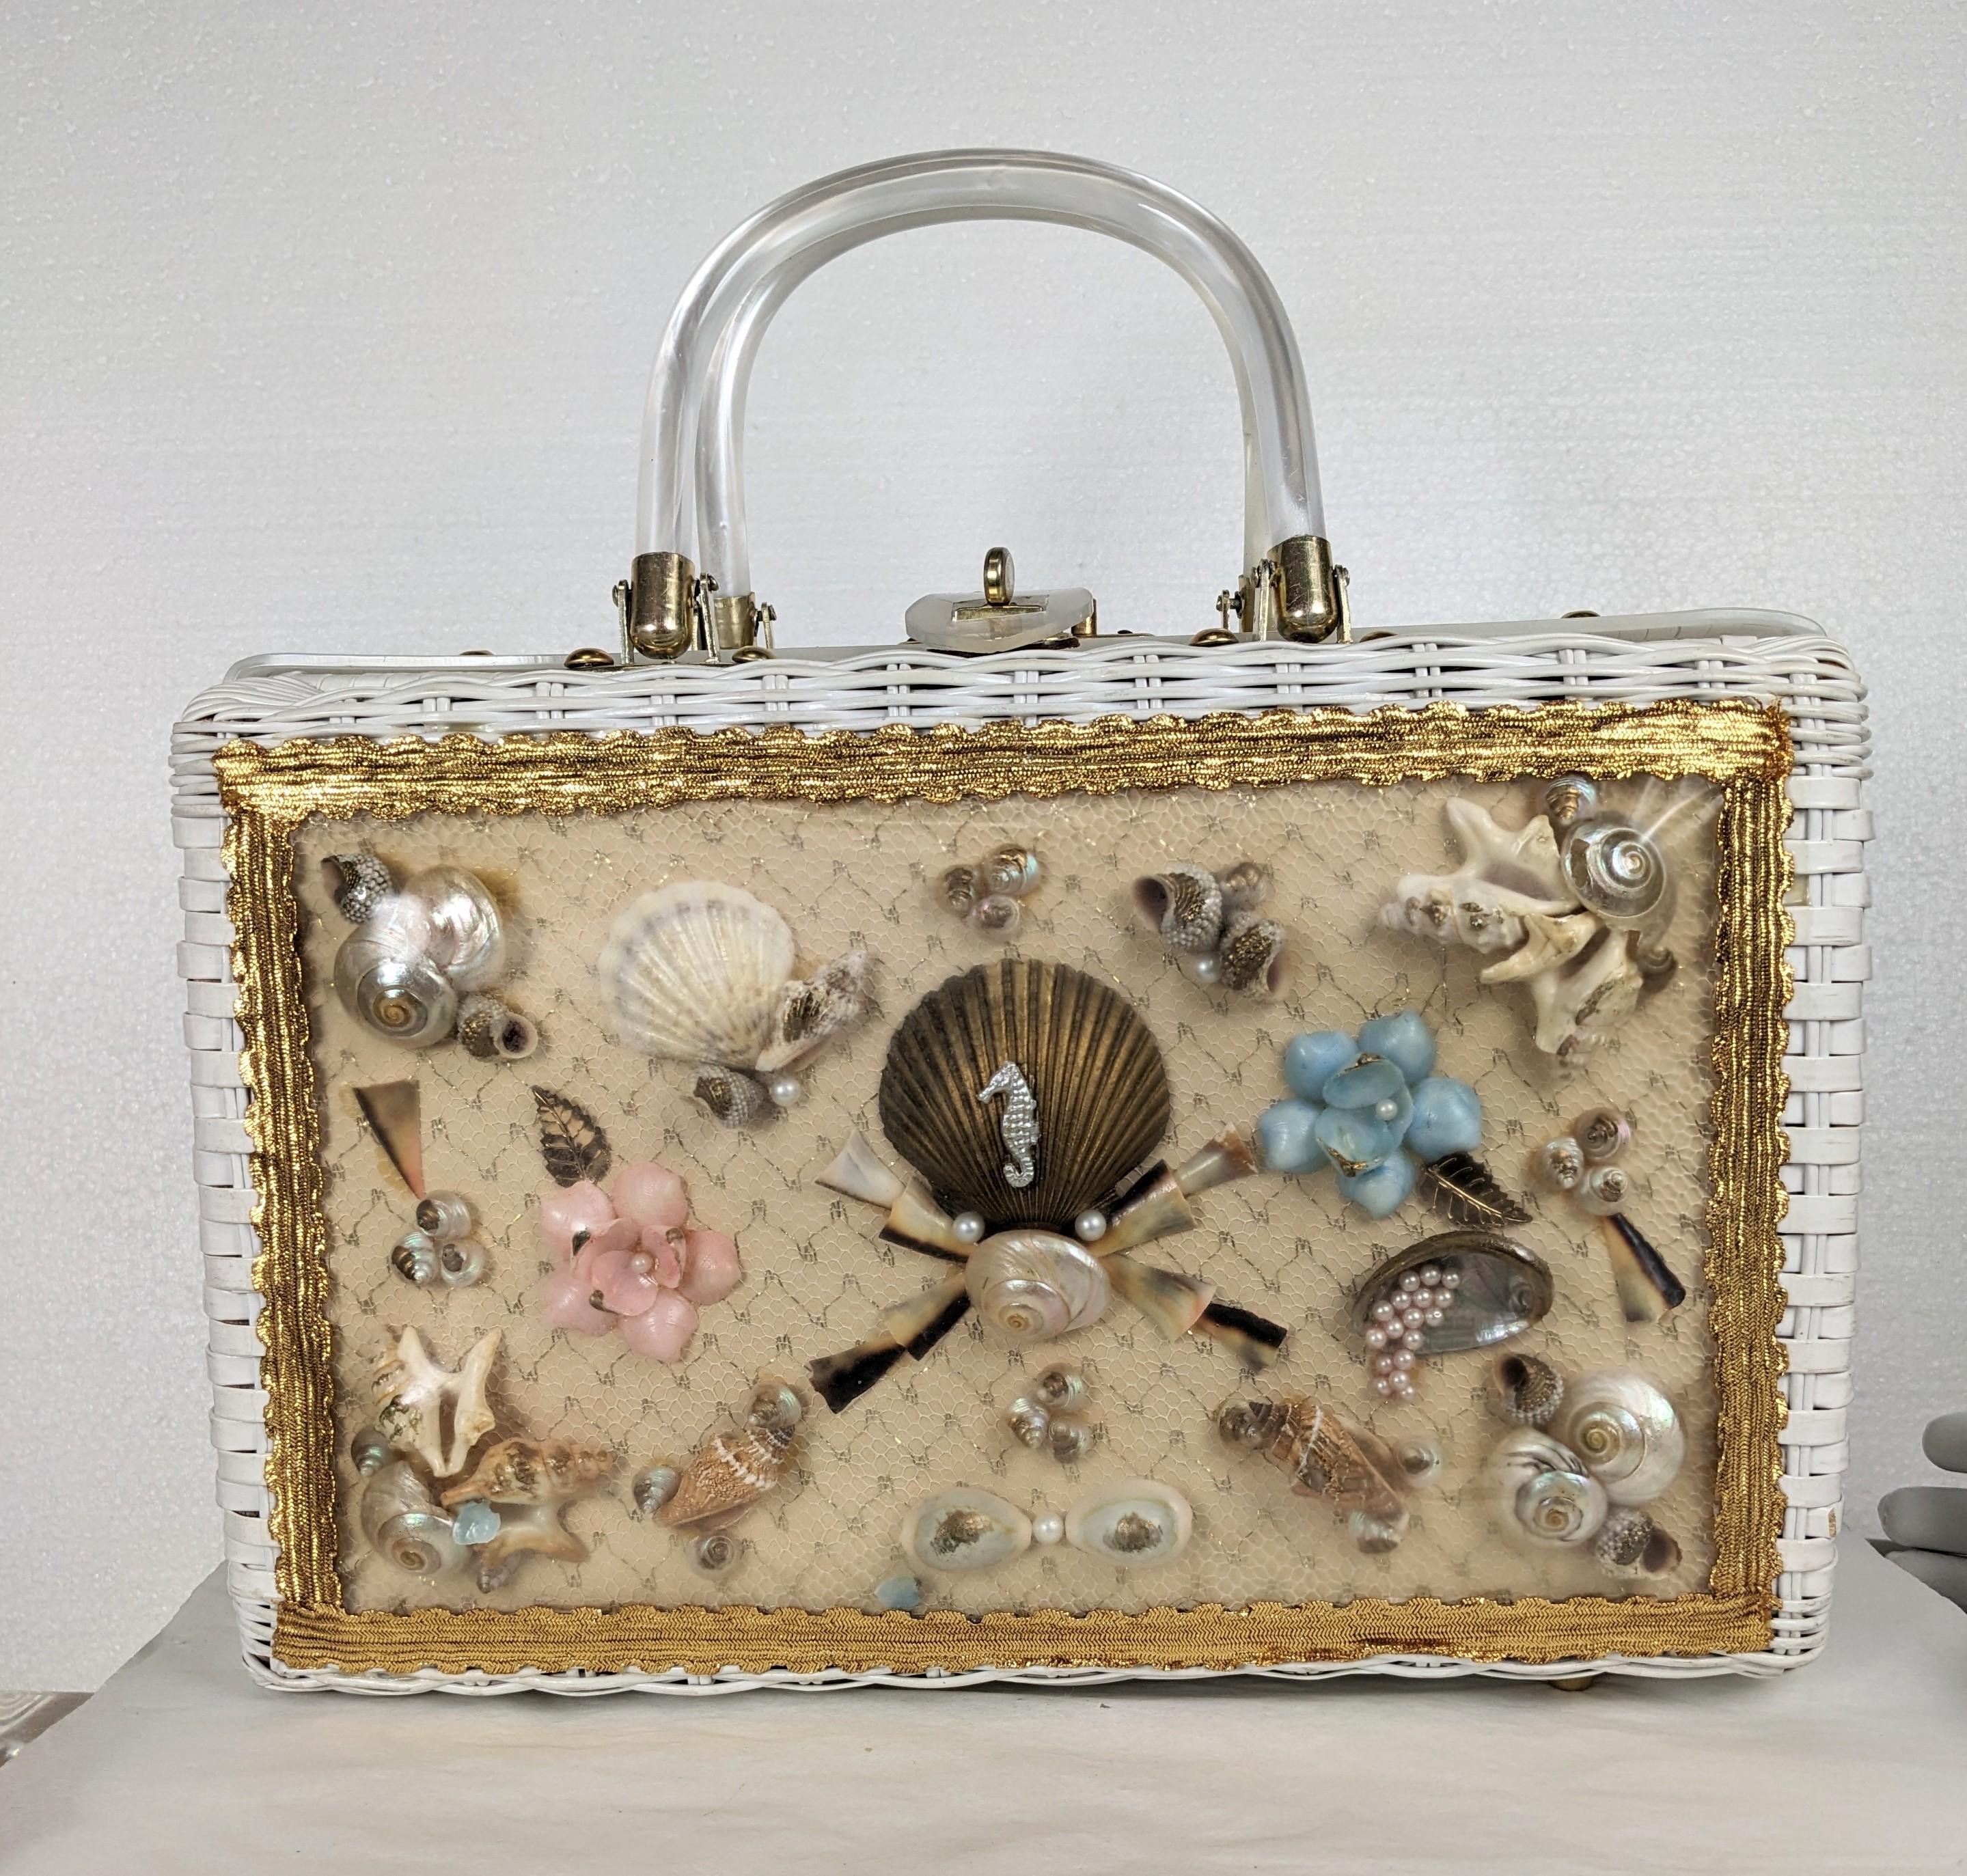 Mid Century Novelty Wicker Seaside Themed Bag from the 1950's. Made in Hong Kong for a resort shop in Hollywood, Florida. White wicker with a sea scape of shells, coral and faux pearls caught under clear vinyl and framed in gold lame bullion trim.